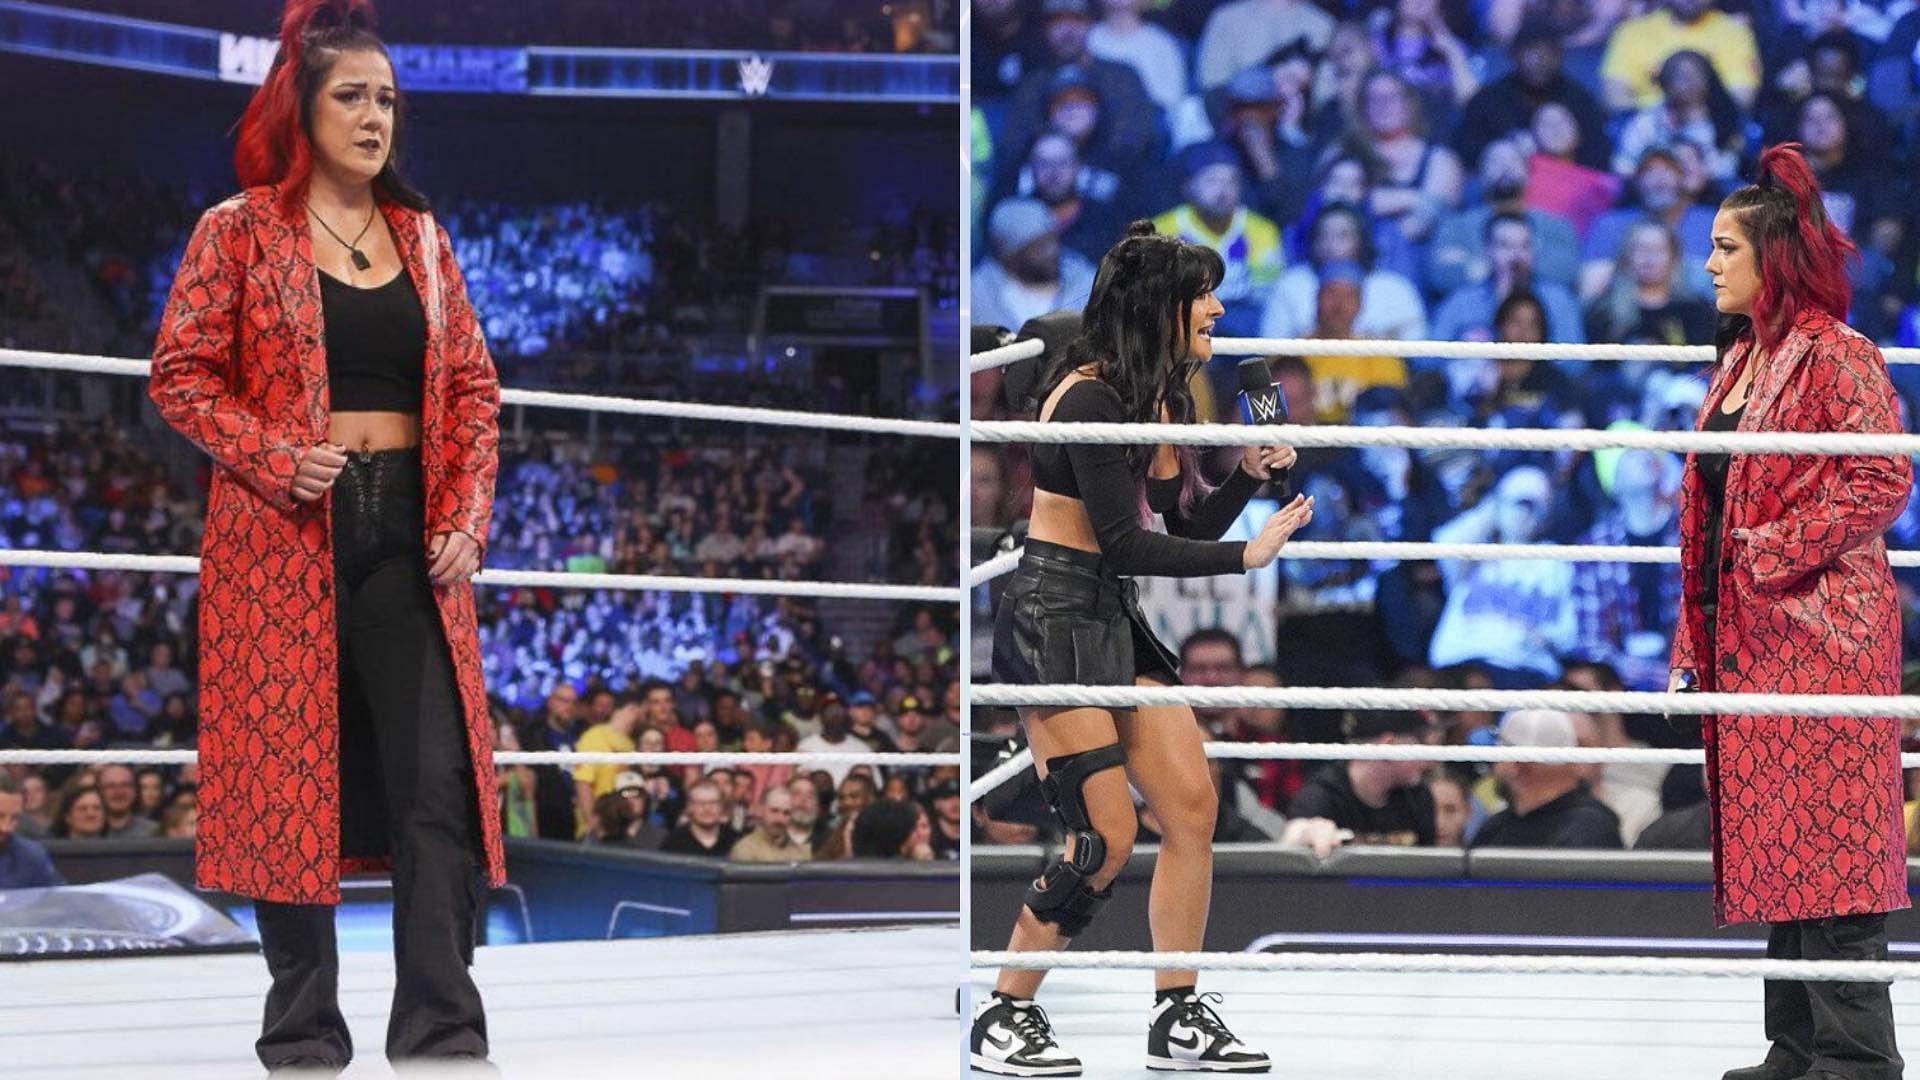 Bayley will be in action on WWE SmackDown this week